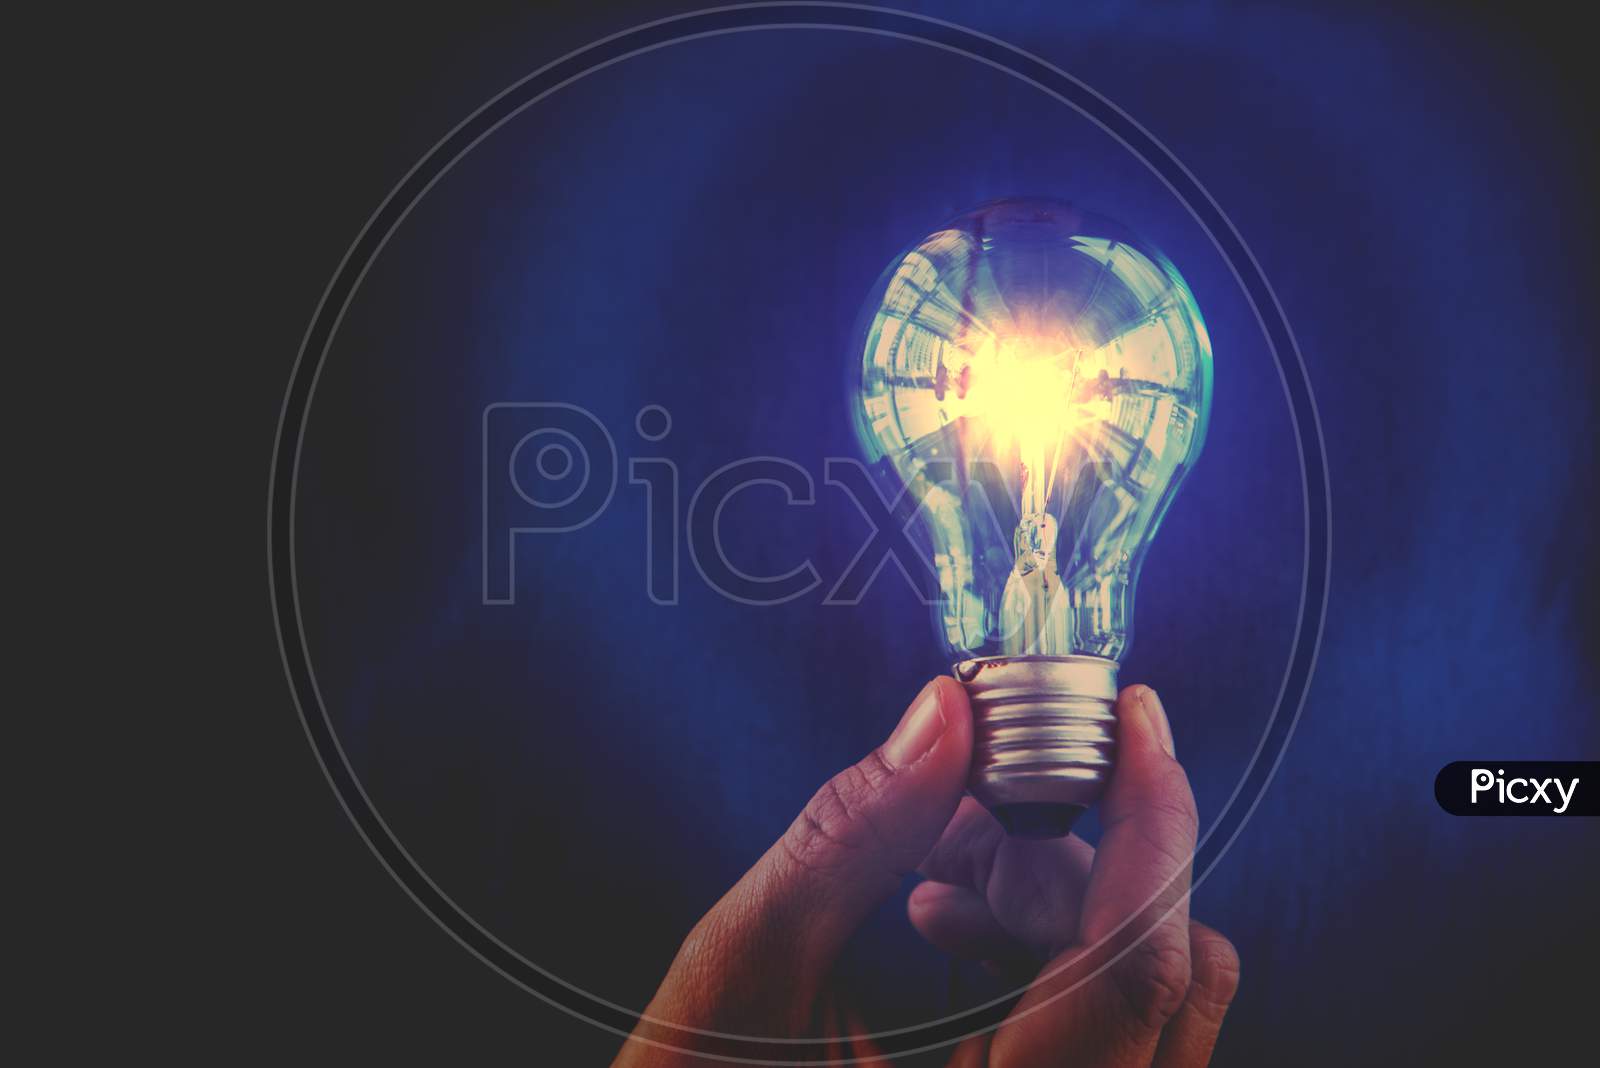 Bulb With Lighting. Idea And Creative Concept  For Startup New Project. Technology Object And Electrical Part Theme. Energy And Power Saving Theme. Copy Space In The Left Side. Blue Filter Background